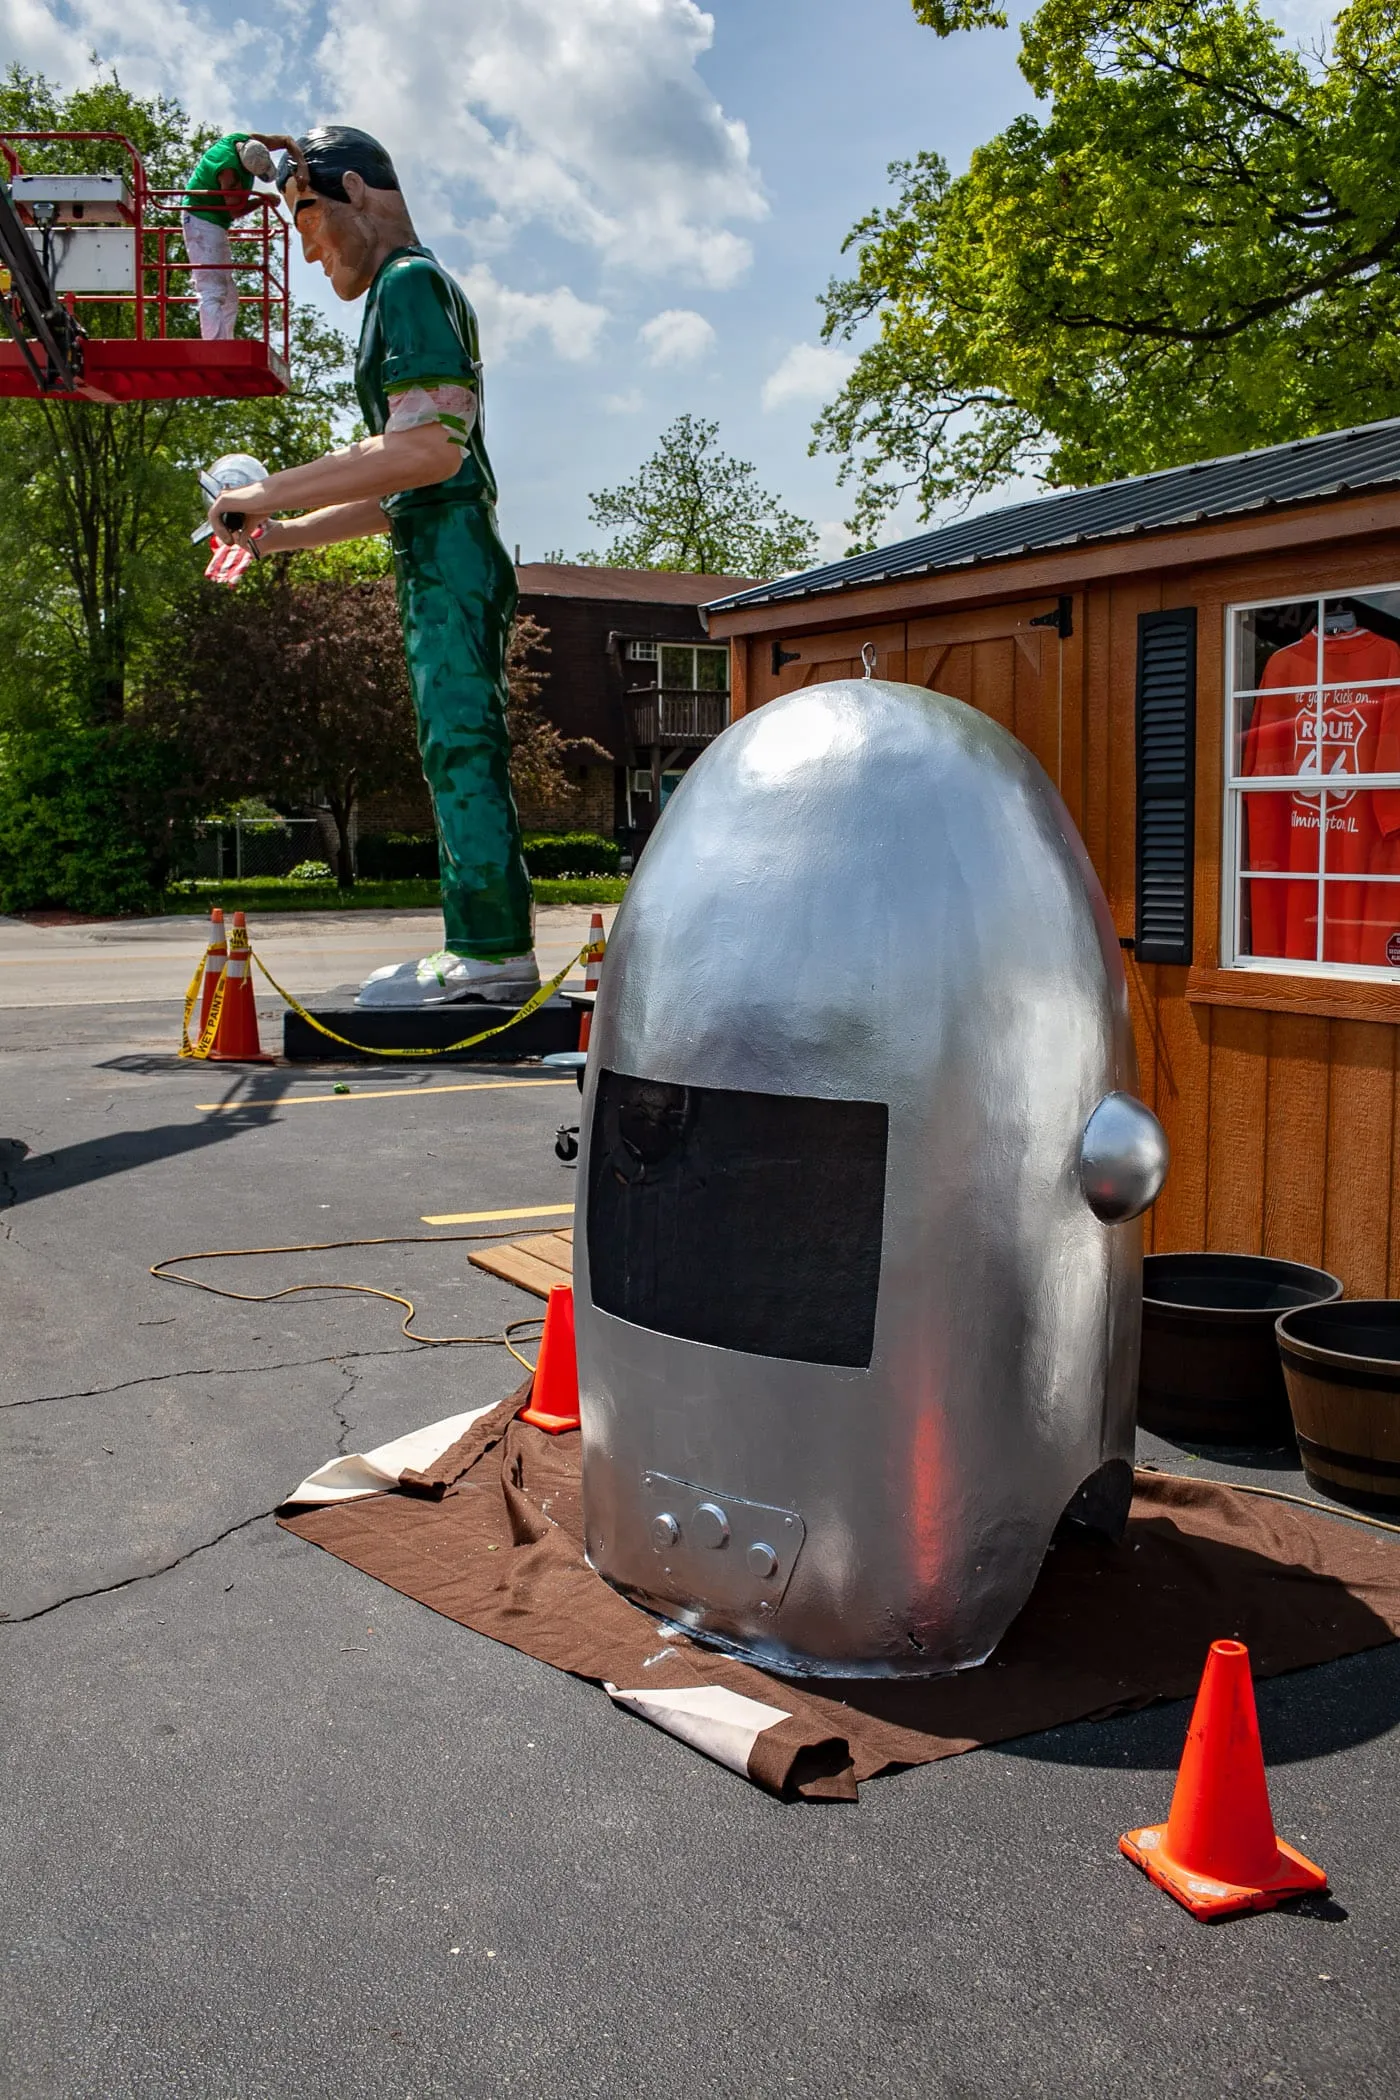 The Gemini Giant Muffler man's helmet at the Launching Pad Drive In in Wilmington, Illinois on Route 66.